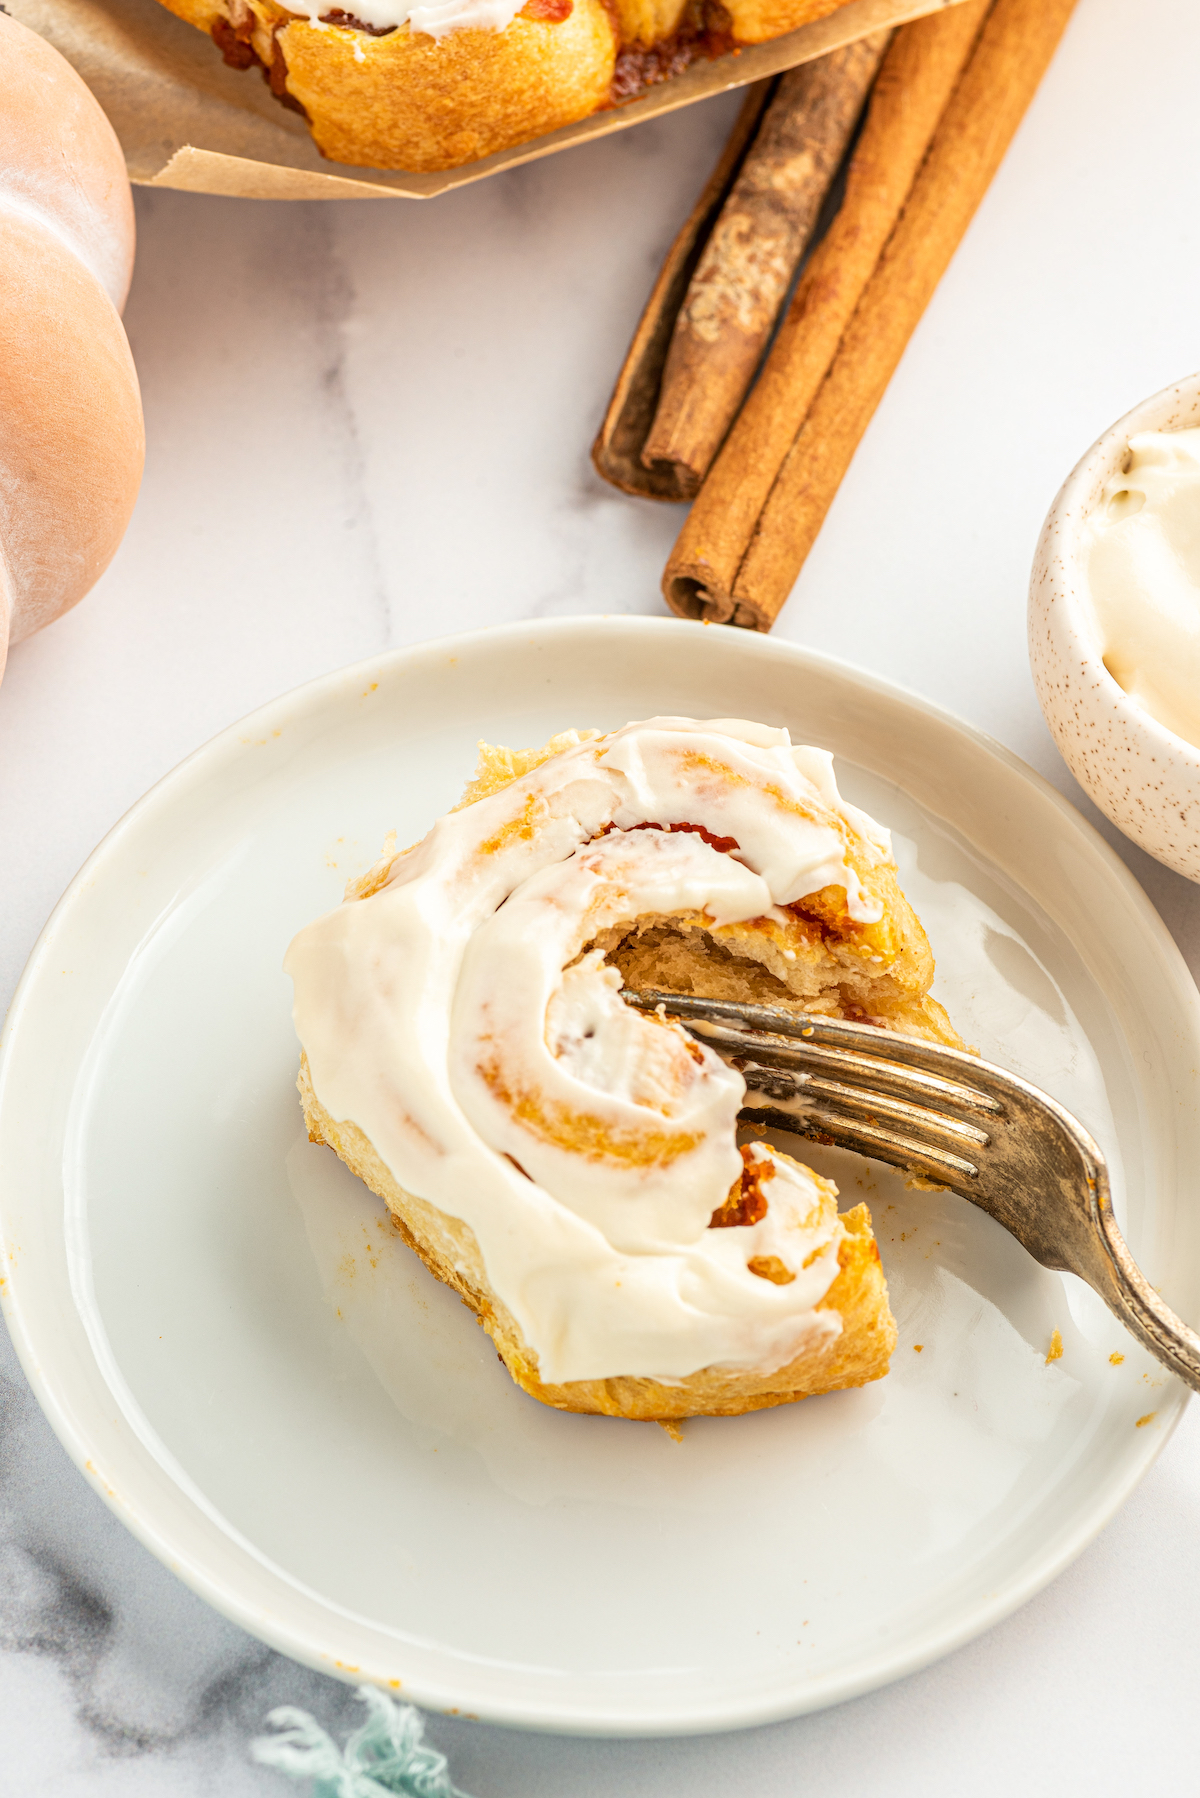 Slicing into a frosted pumpkin cinnamon roll.